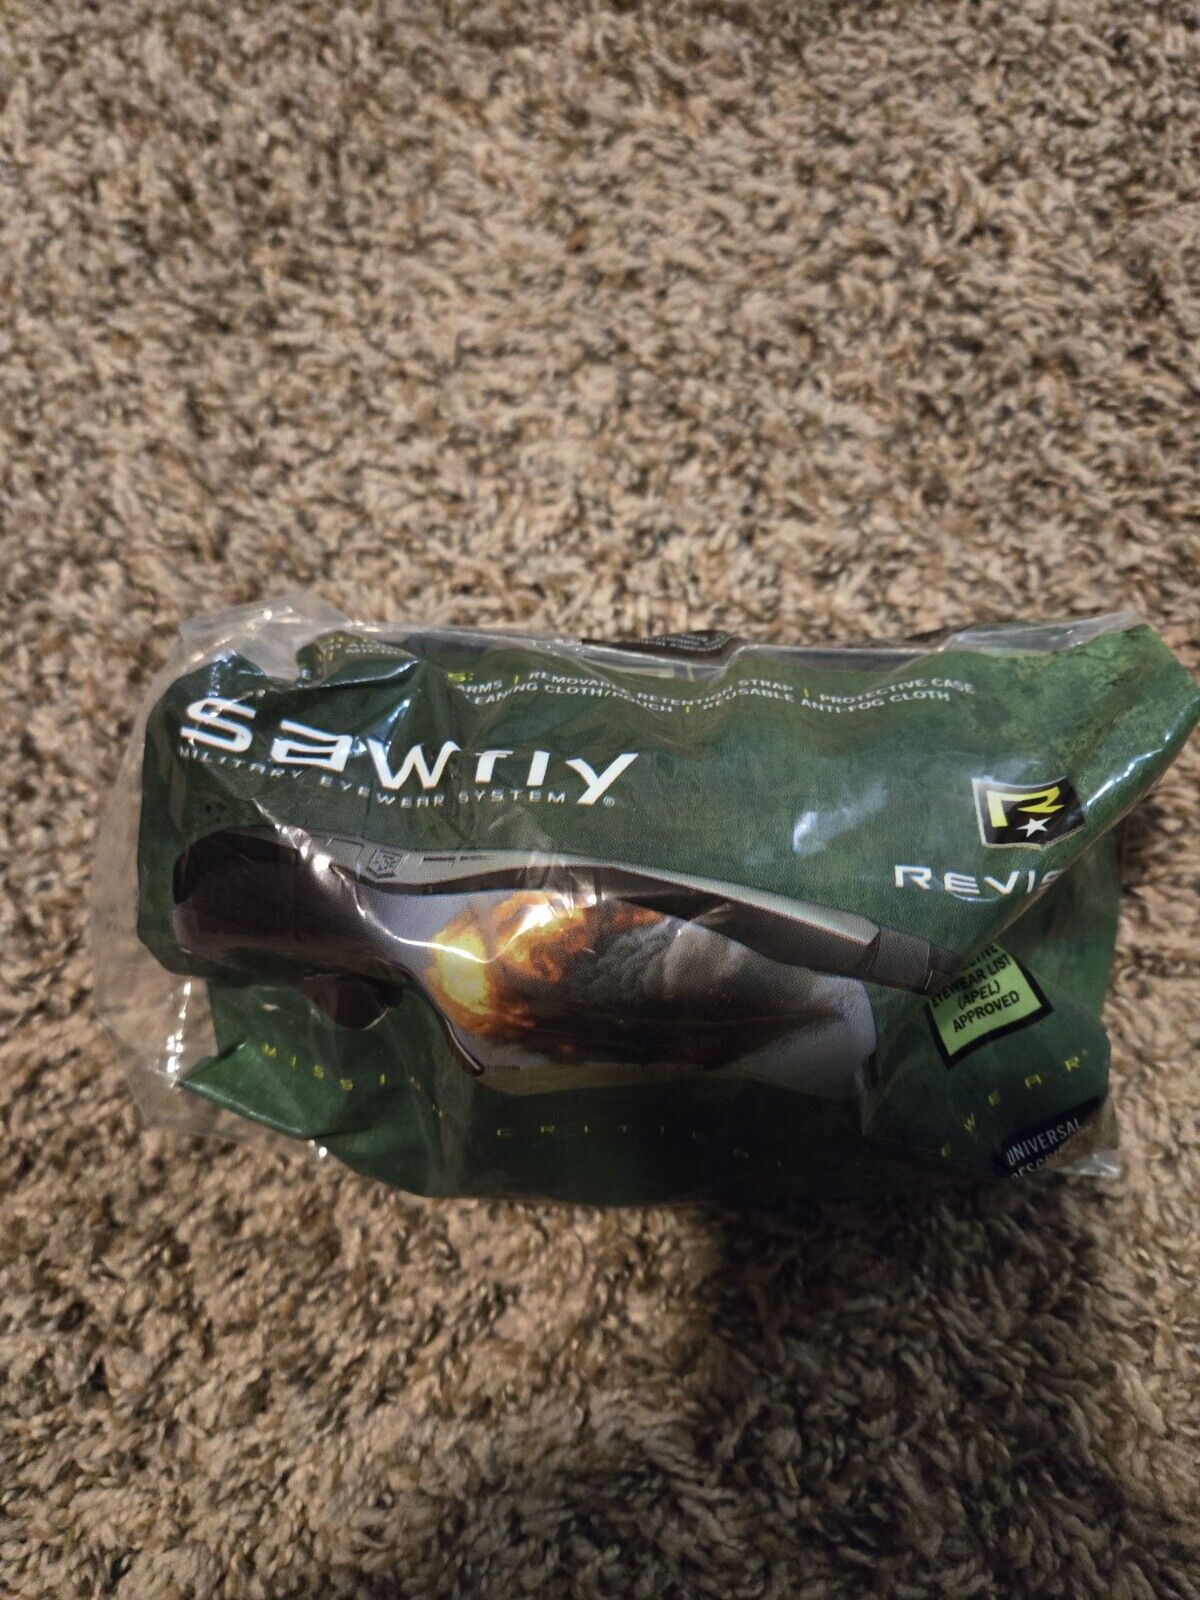 Revision Sawfly Military Eyewear  Mission Critical Eyewear LENS & Case ONLY